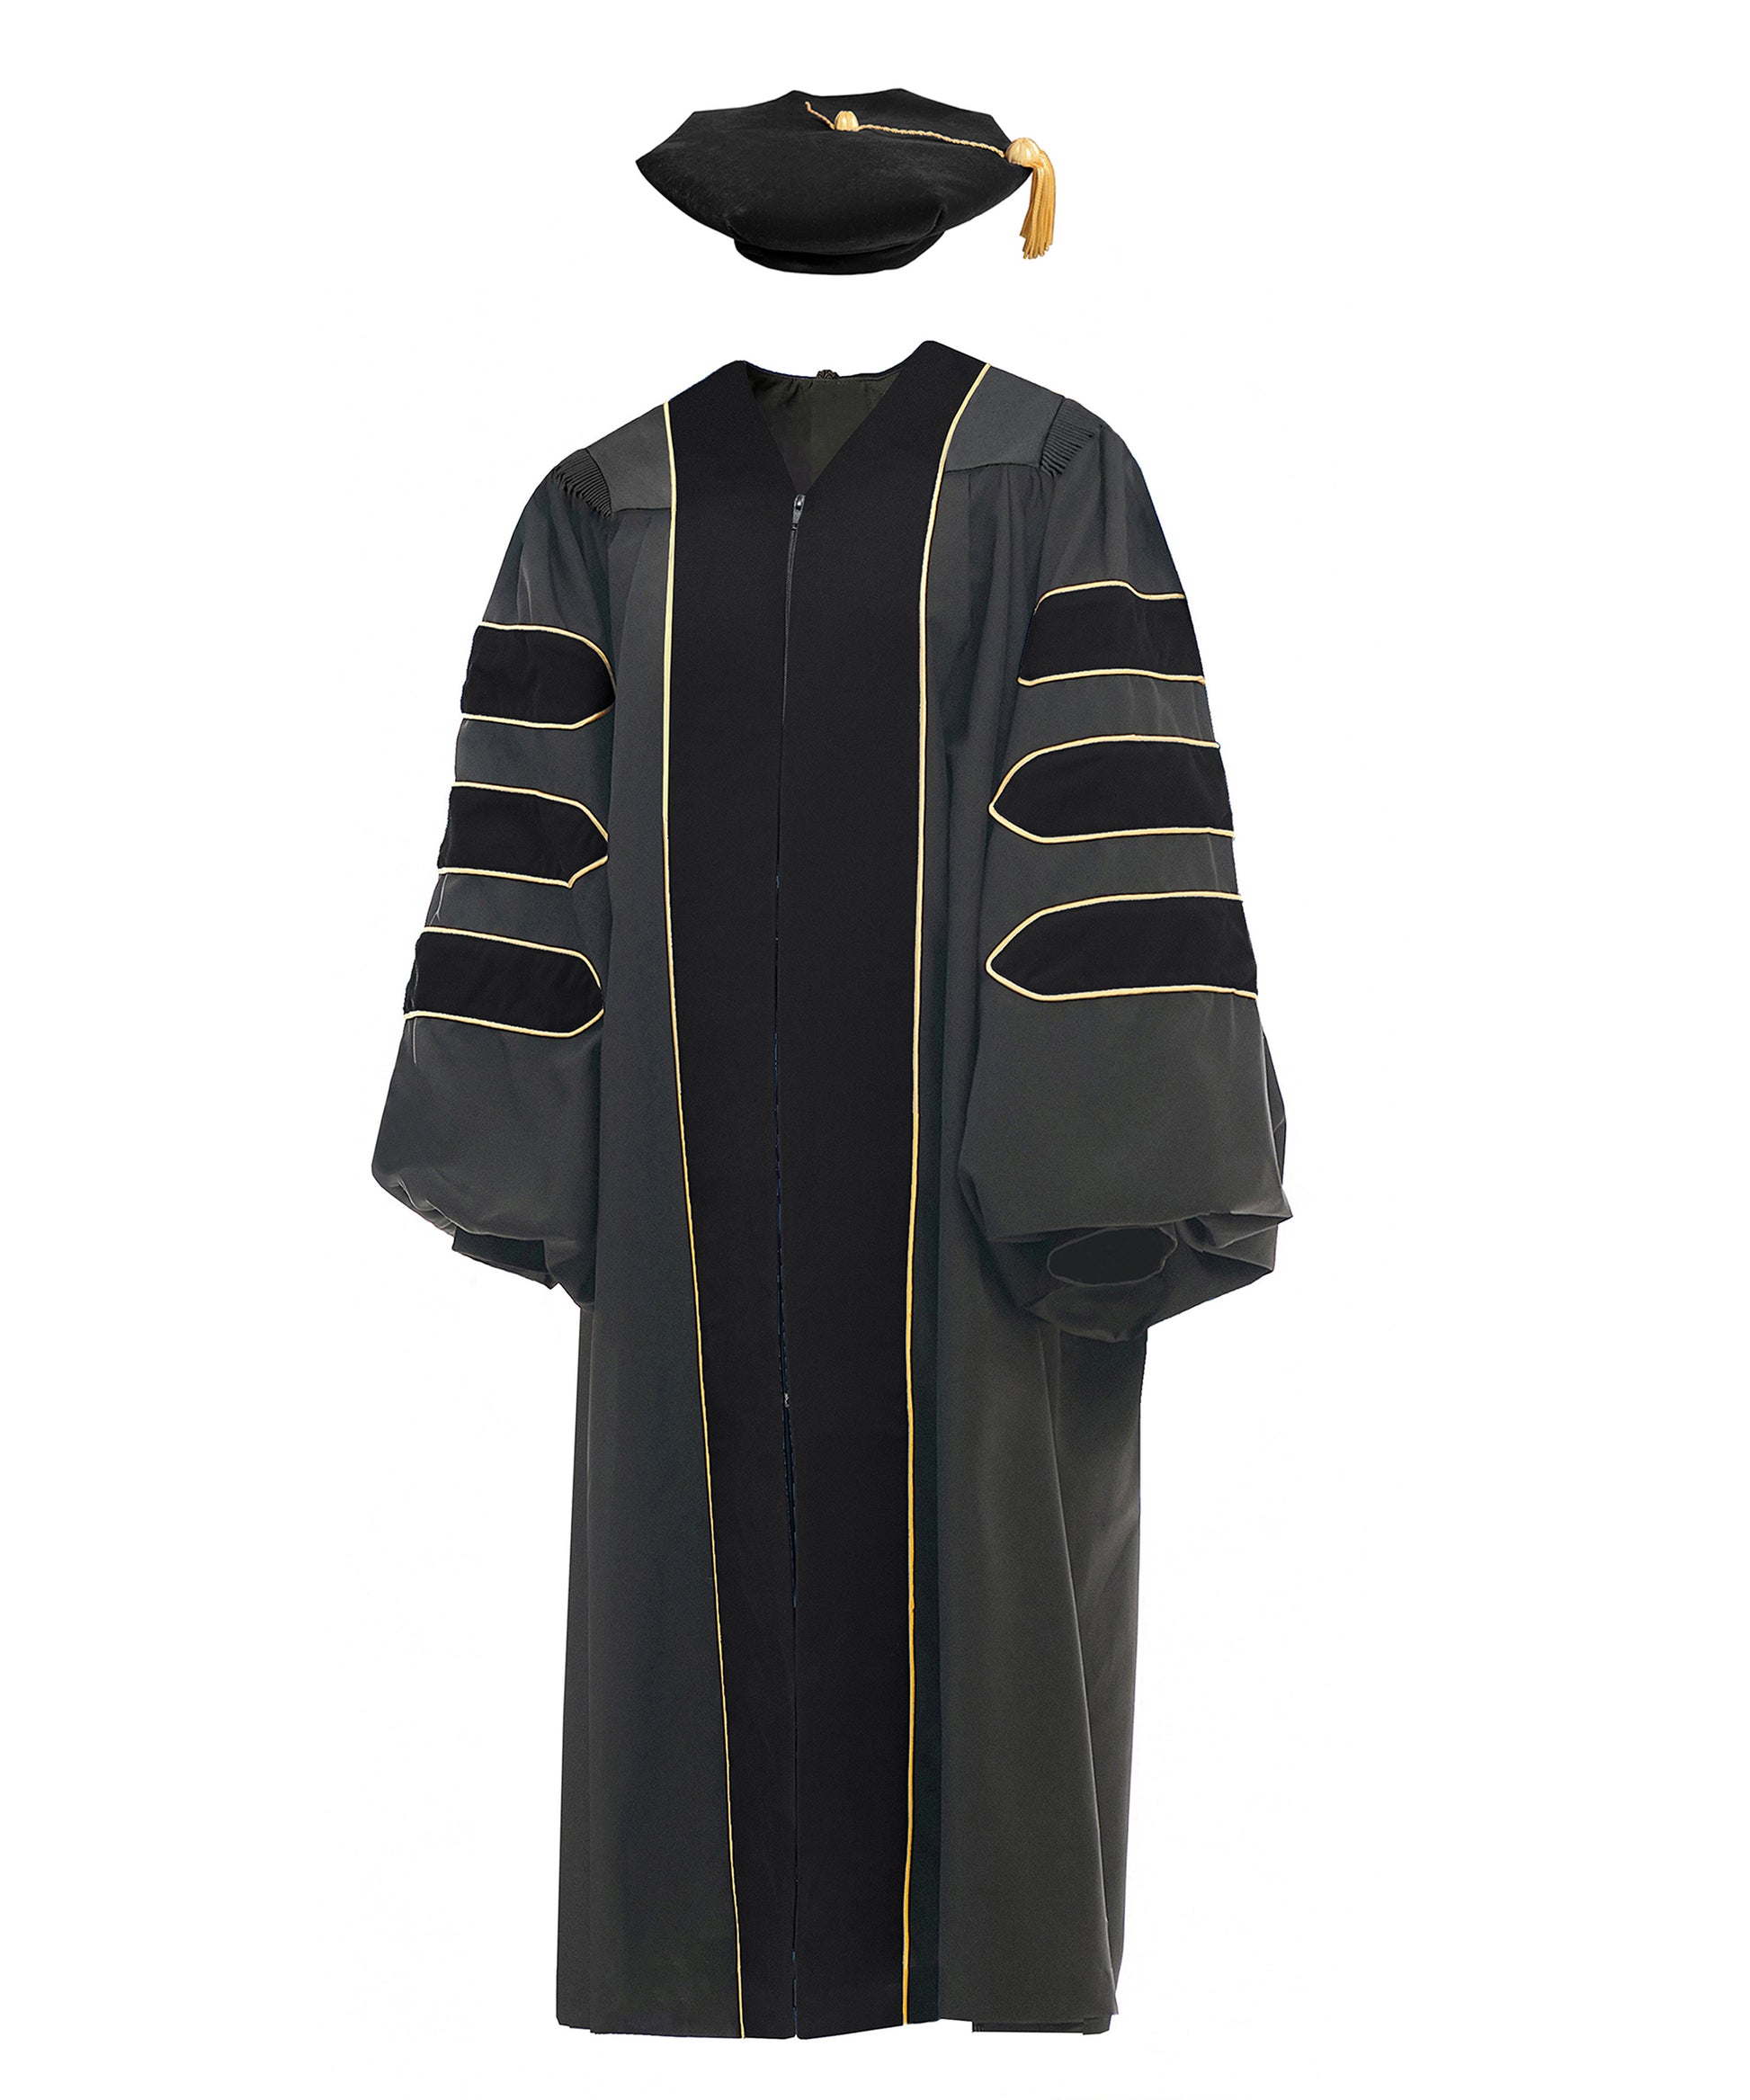 Deluxe Doctoral Graduation Gown/Doctoral Tam Package Rich in Color & Size-CA graduation